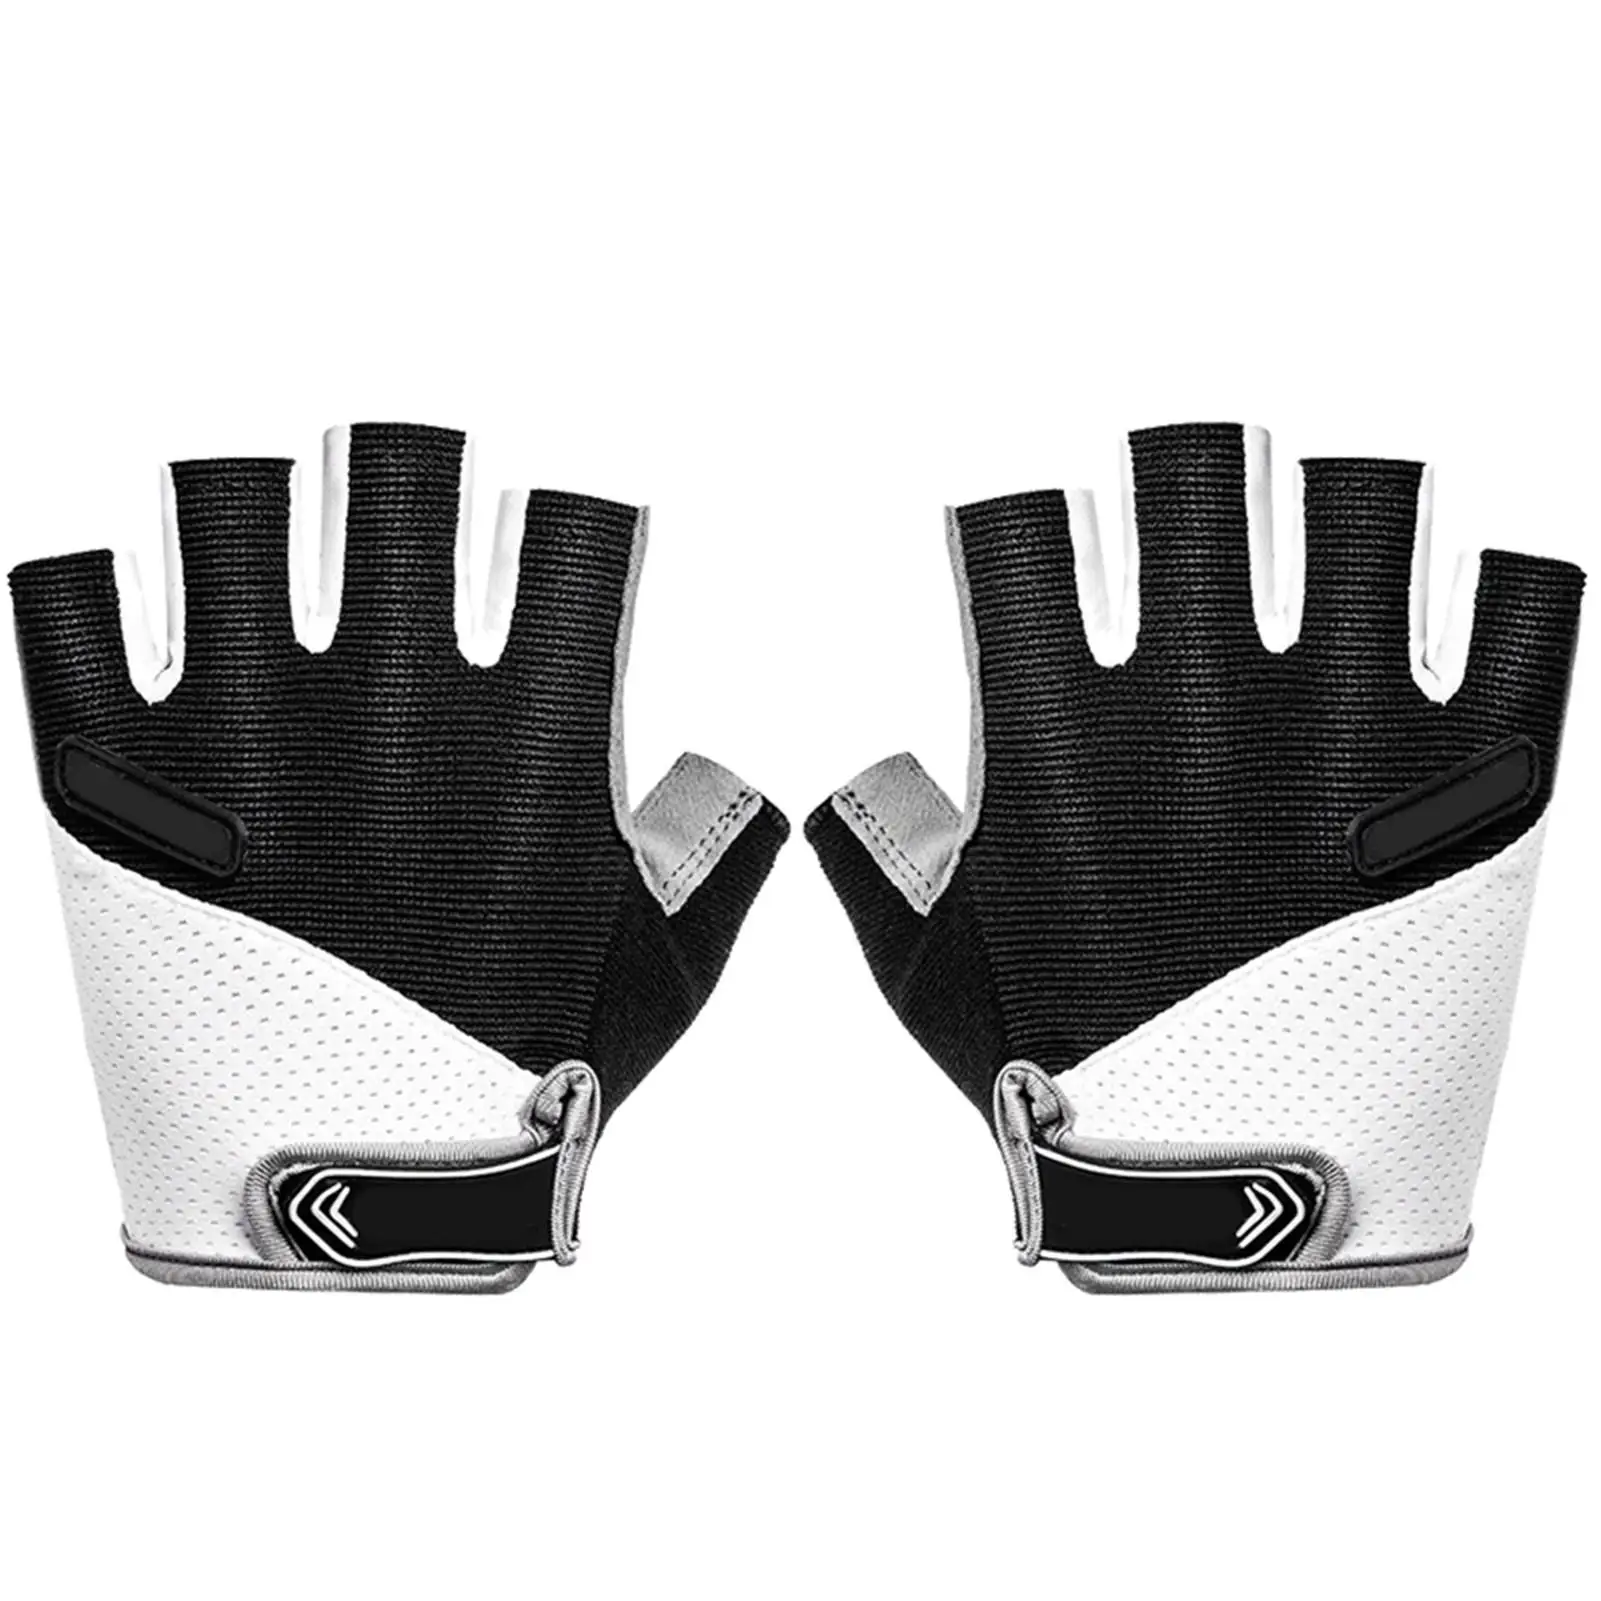 Outdoor Sports Cycling Bicycle Short Half Finger Gloves Fitness MTB Bike Gloves 